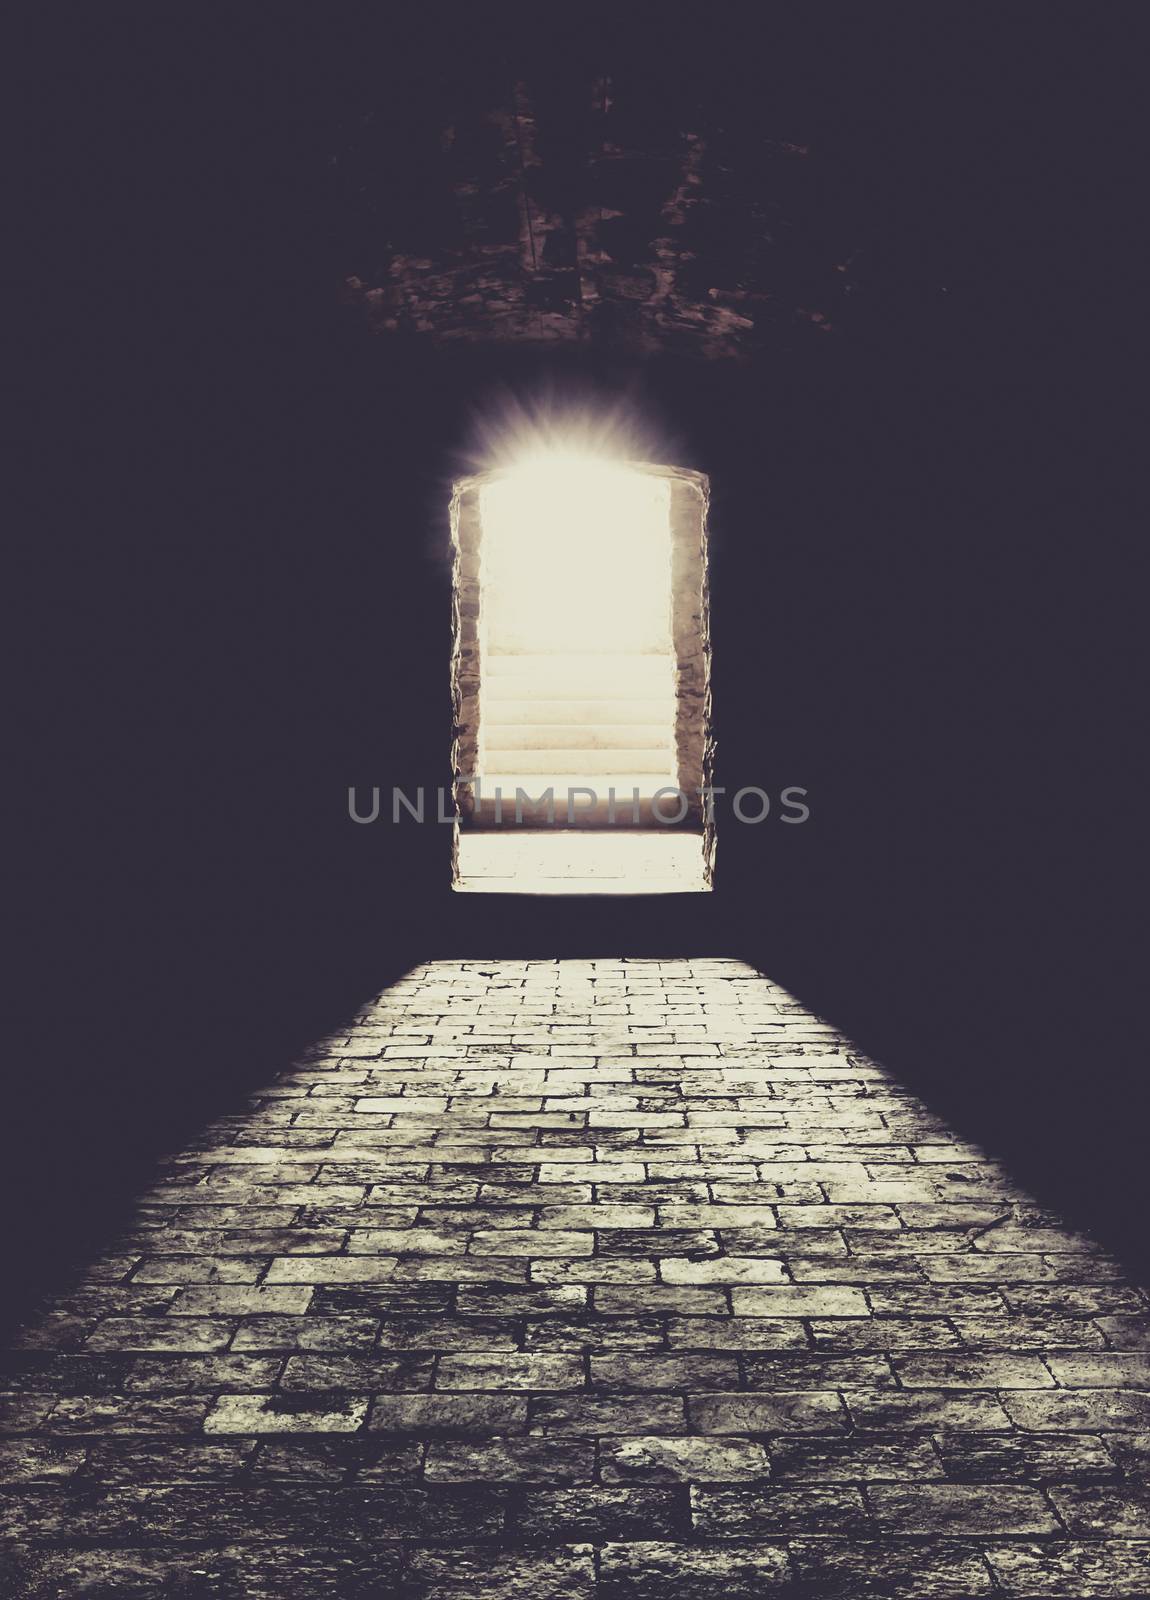 Conceptual image with a basement interior, the strong sun lights coming over the stone stairs and floor